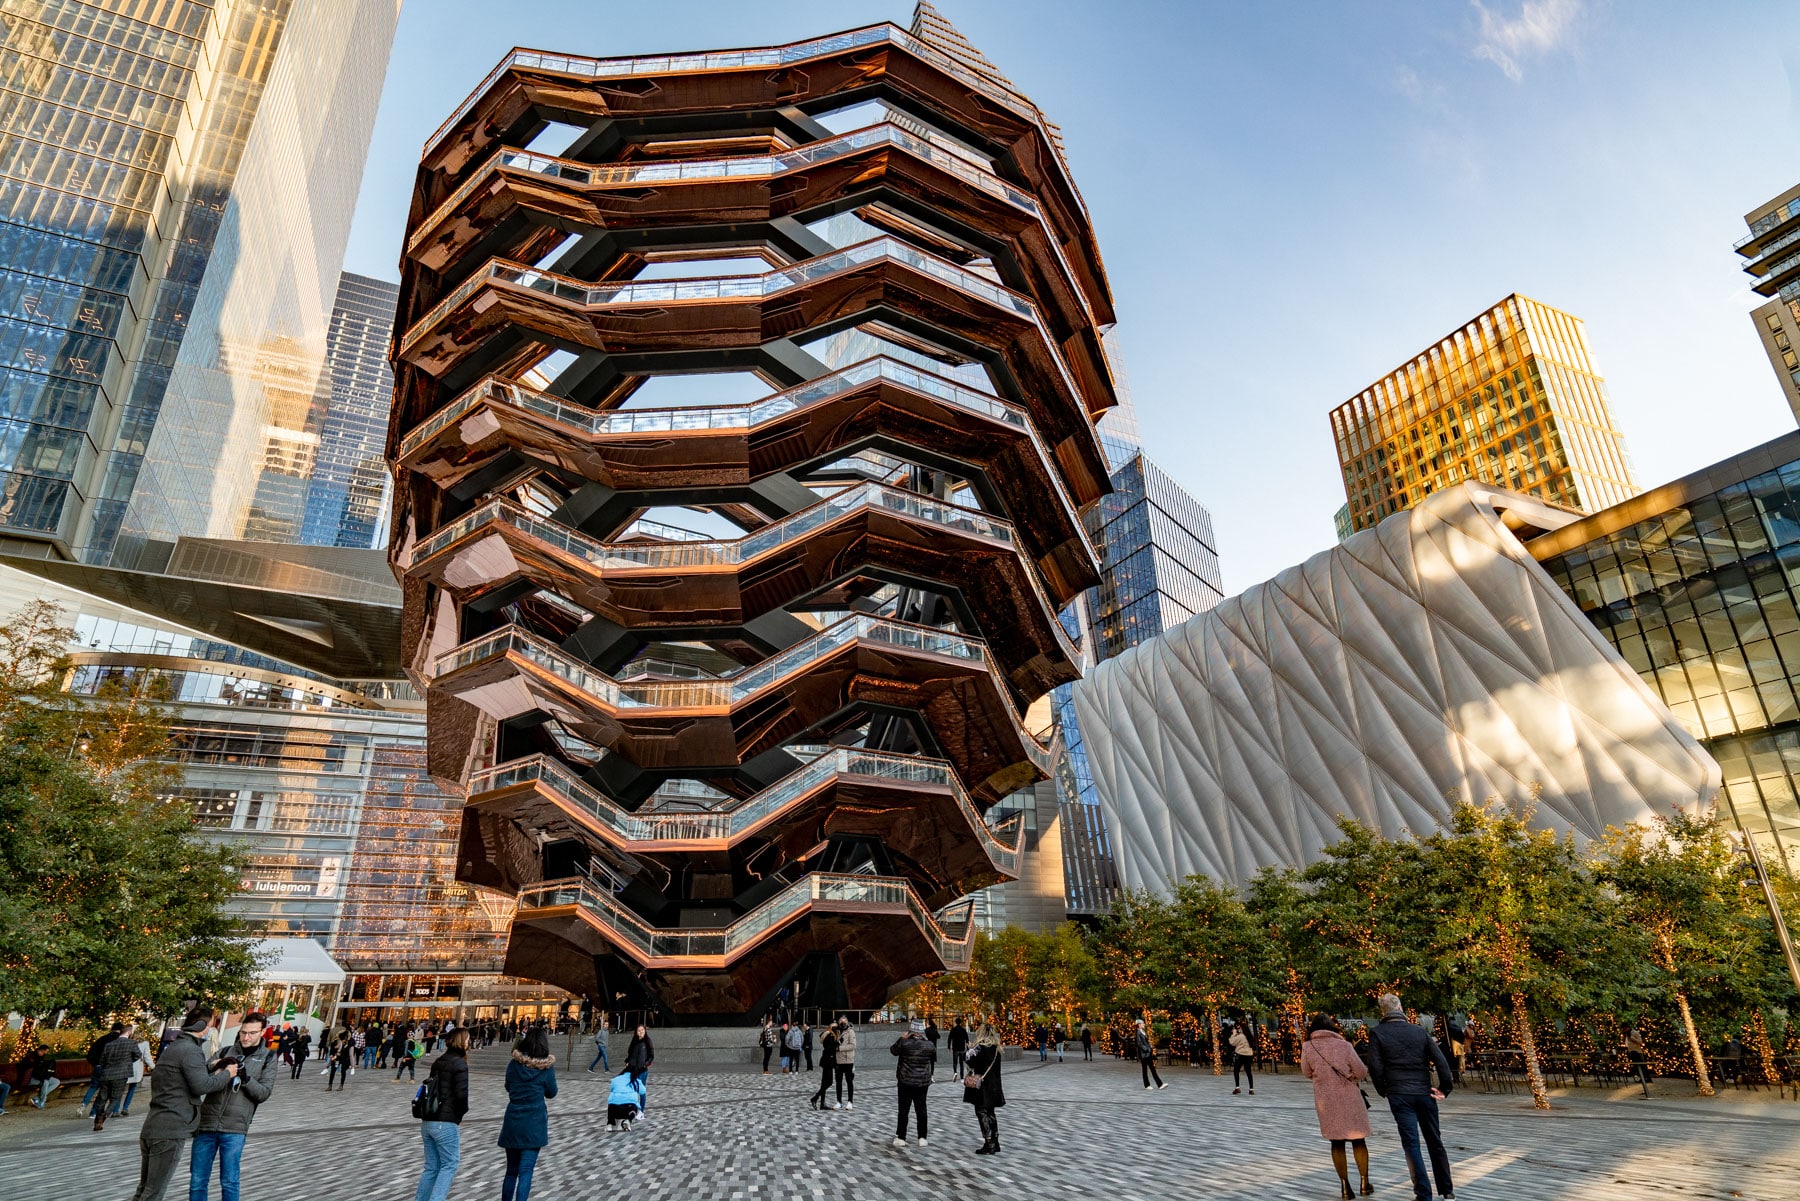 Things to do in Chelsea, The Vessel outside of The Shops at Hudson Yards 